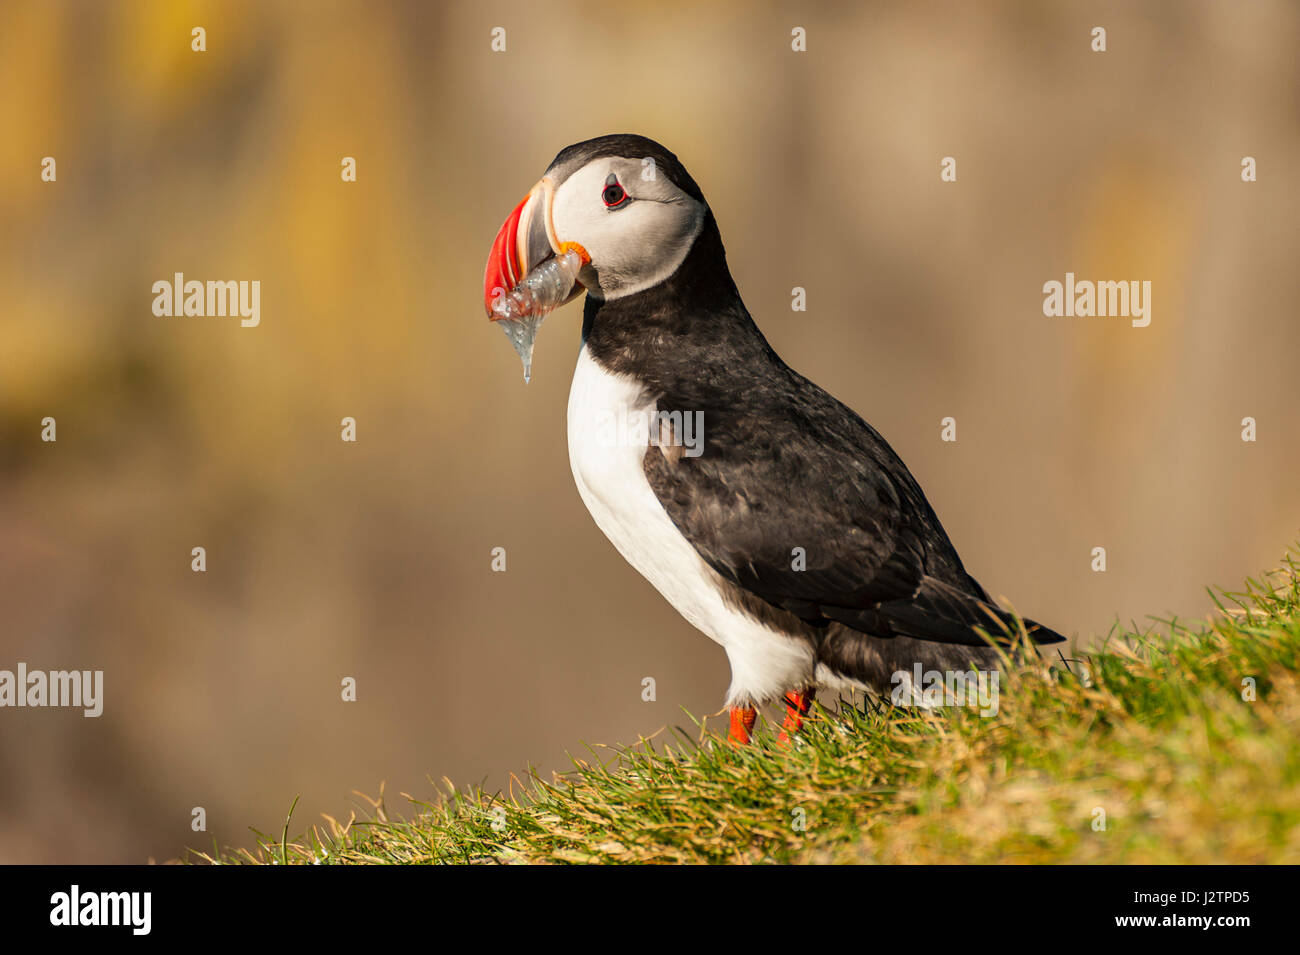 Atlantic Puffin (Fratercula arctica), one bird standing on grass with beak full of sand eels, mating colours, Ingolfshofdi Nature Reserve, Iceland. Stock Photo